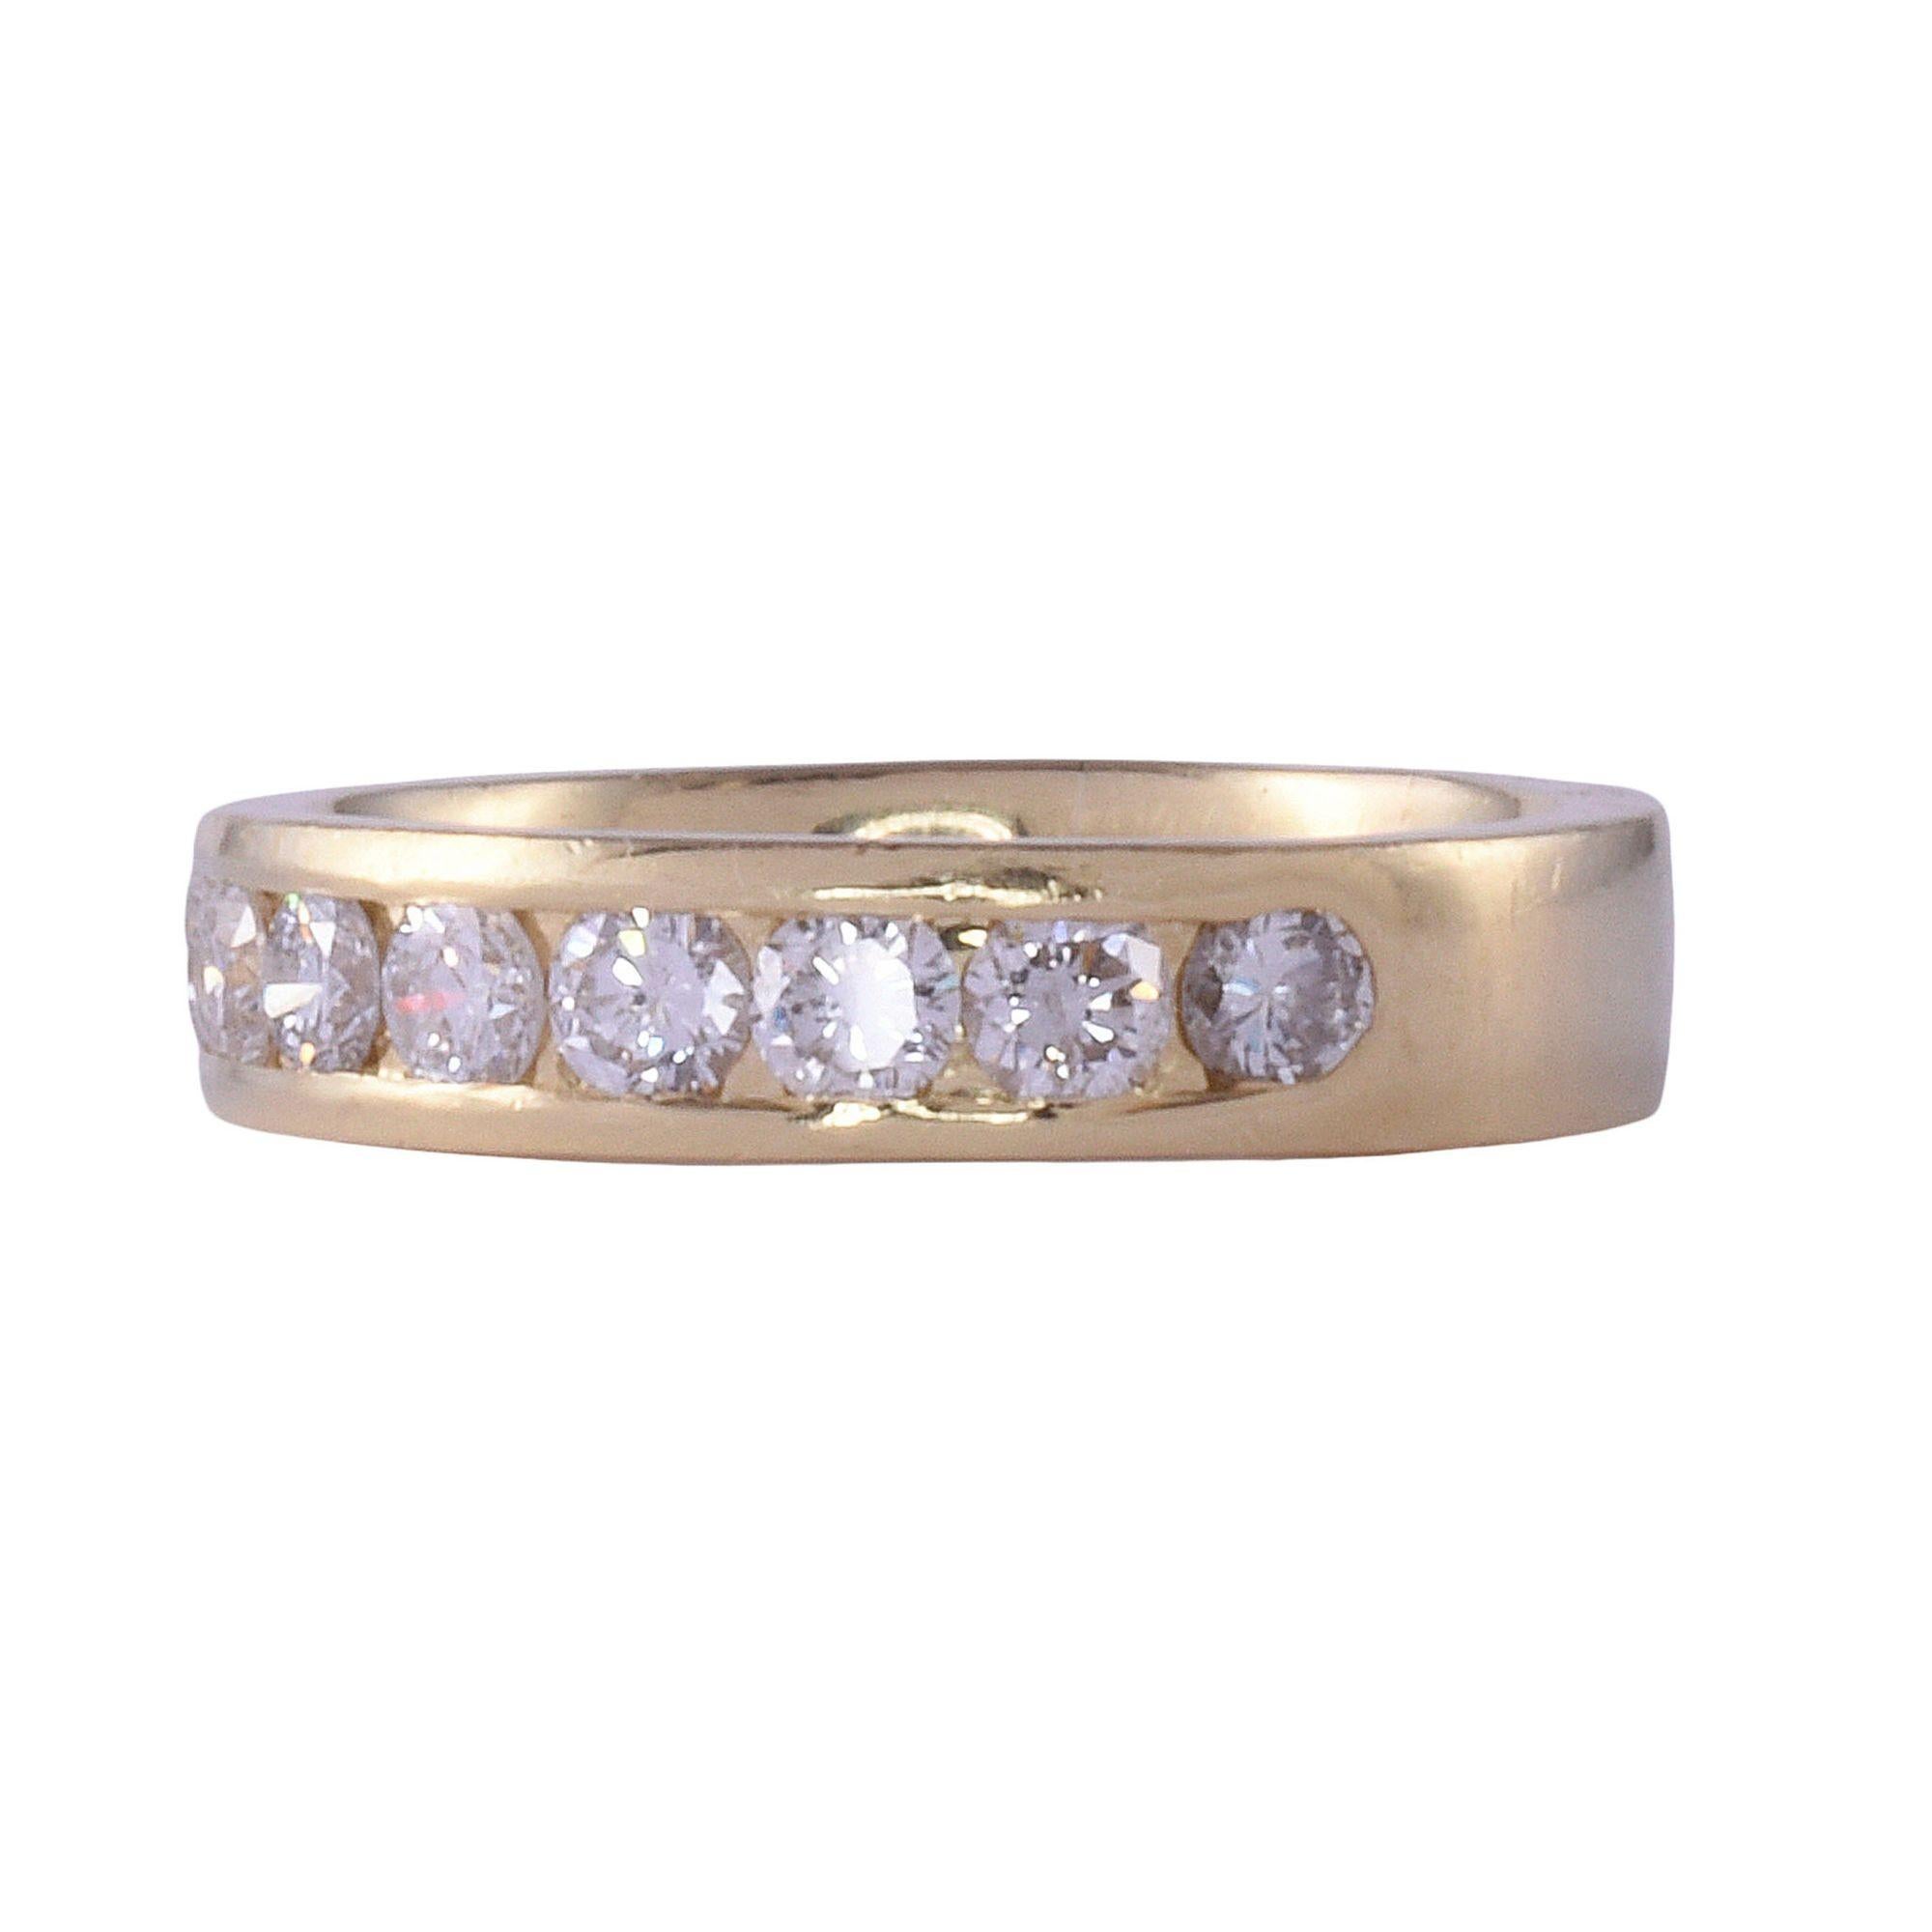 Estate .75 CTW diamond 18K gold band. This band style ring is crafted in 18 karat yellow gold and features a channel of diamonds at .75 carat total weight. The diamonds have VS2-SI2 clarity and G-I color. This diamond band is a size 6+. [KIMH 599]